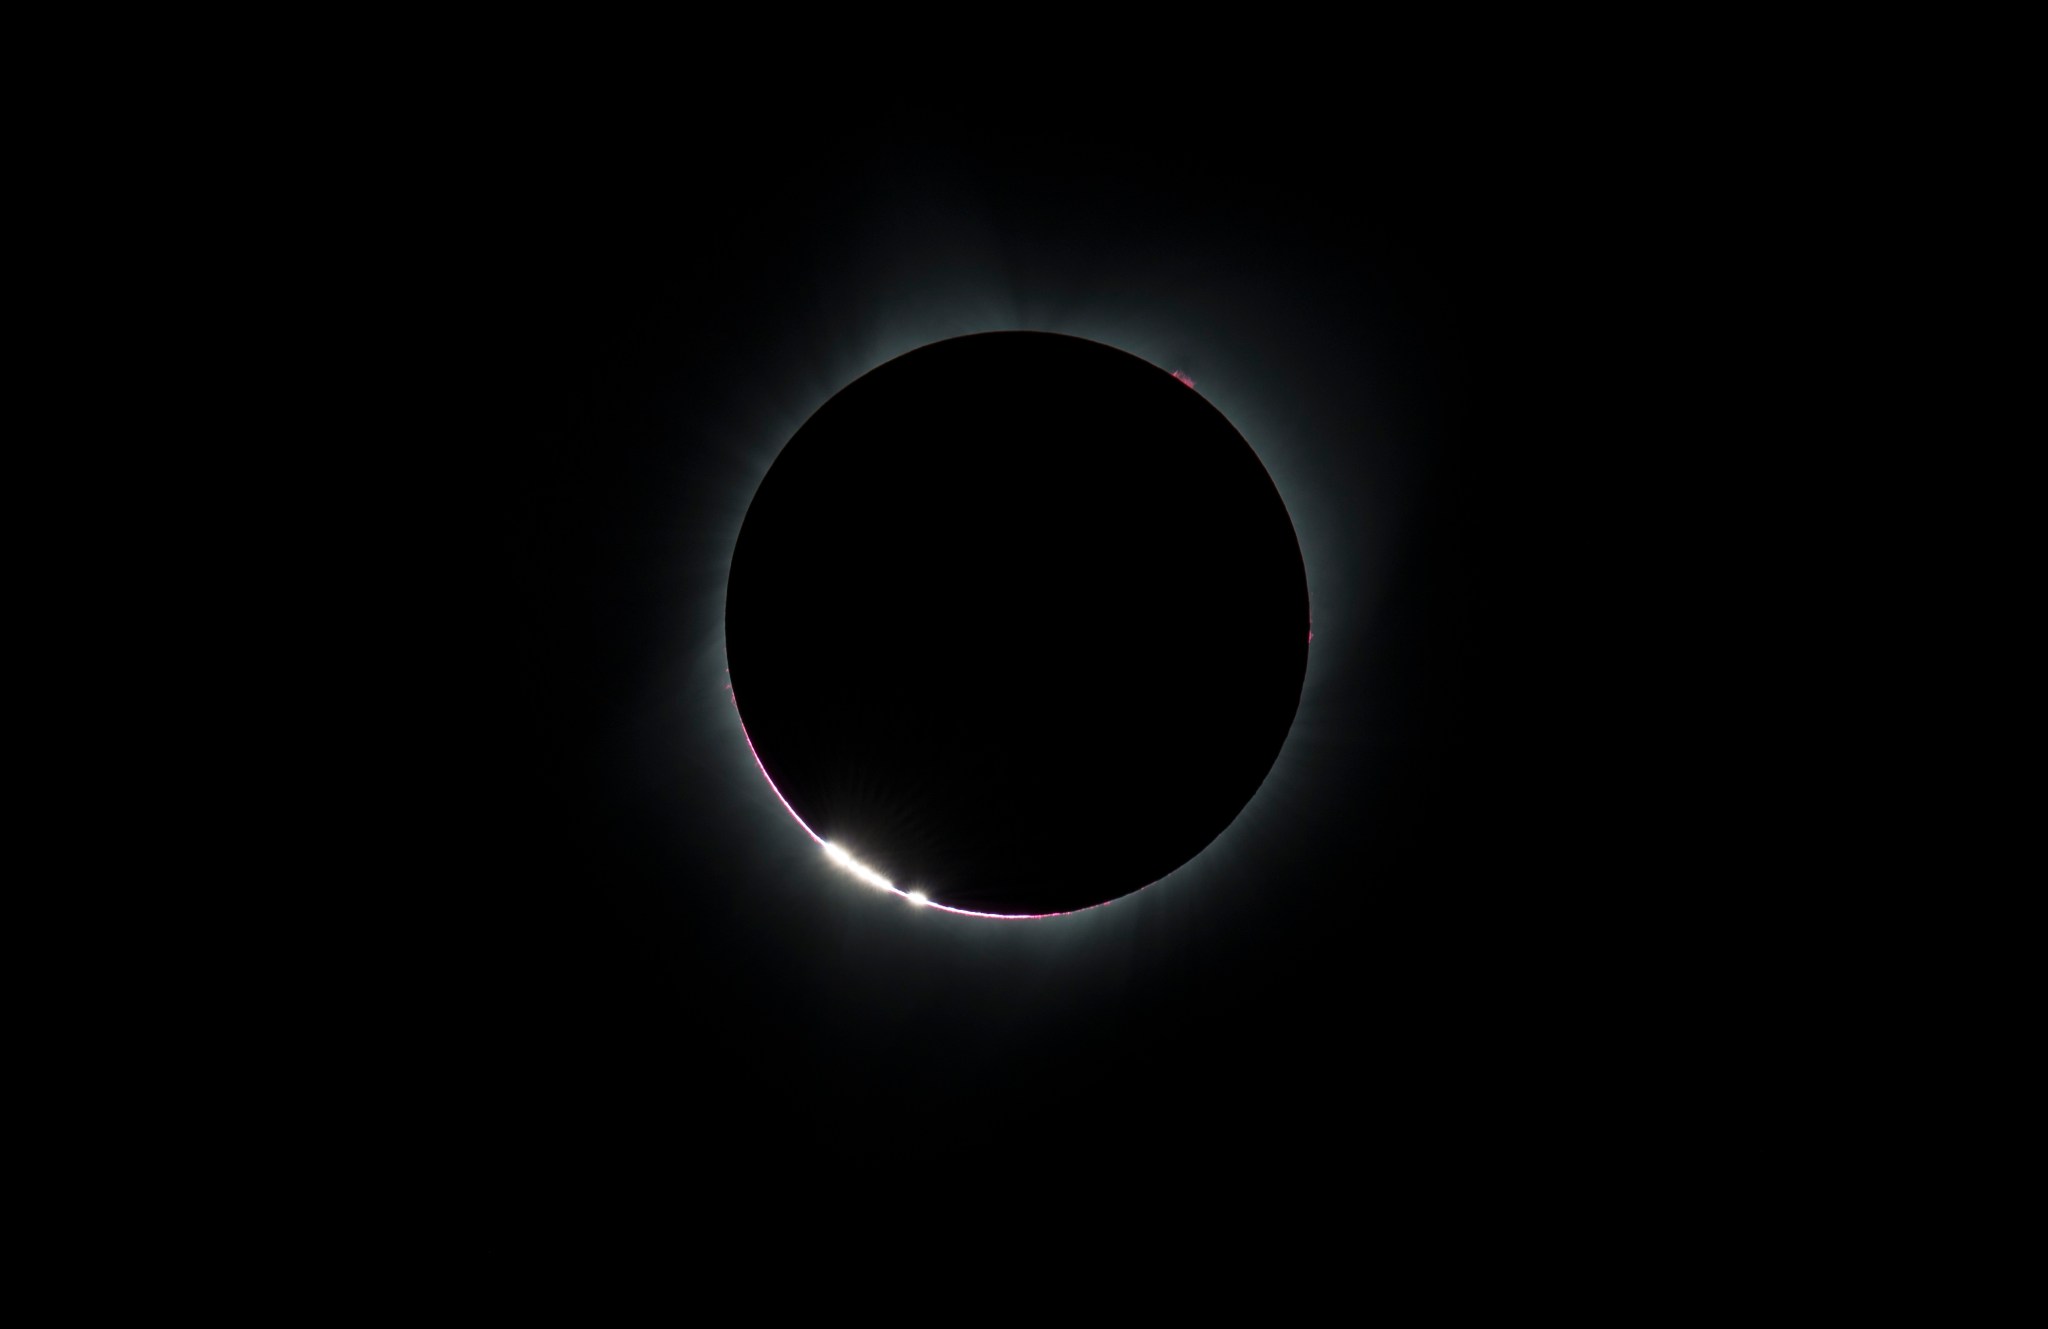 The Bailey's Beads effect is seen as the moon makes its final move over the sun during the total solar eclipse on Monday, August 21, 2017 above Madras, Oregon. A total solar eclipse swept across a narrow portion of the contiguous United States from Lincoln Beach, Oregon to Charleston, South Carolina. A partial solar eclipse was visible across the entire North American continent along with parts of South America, Africa, and Europe.